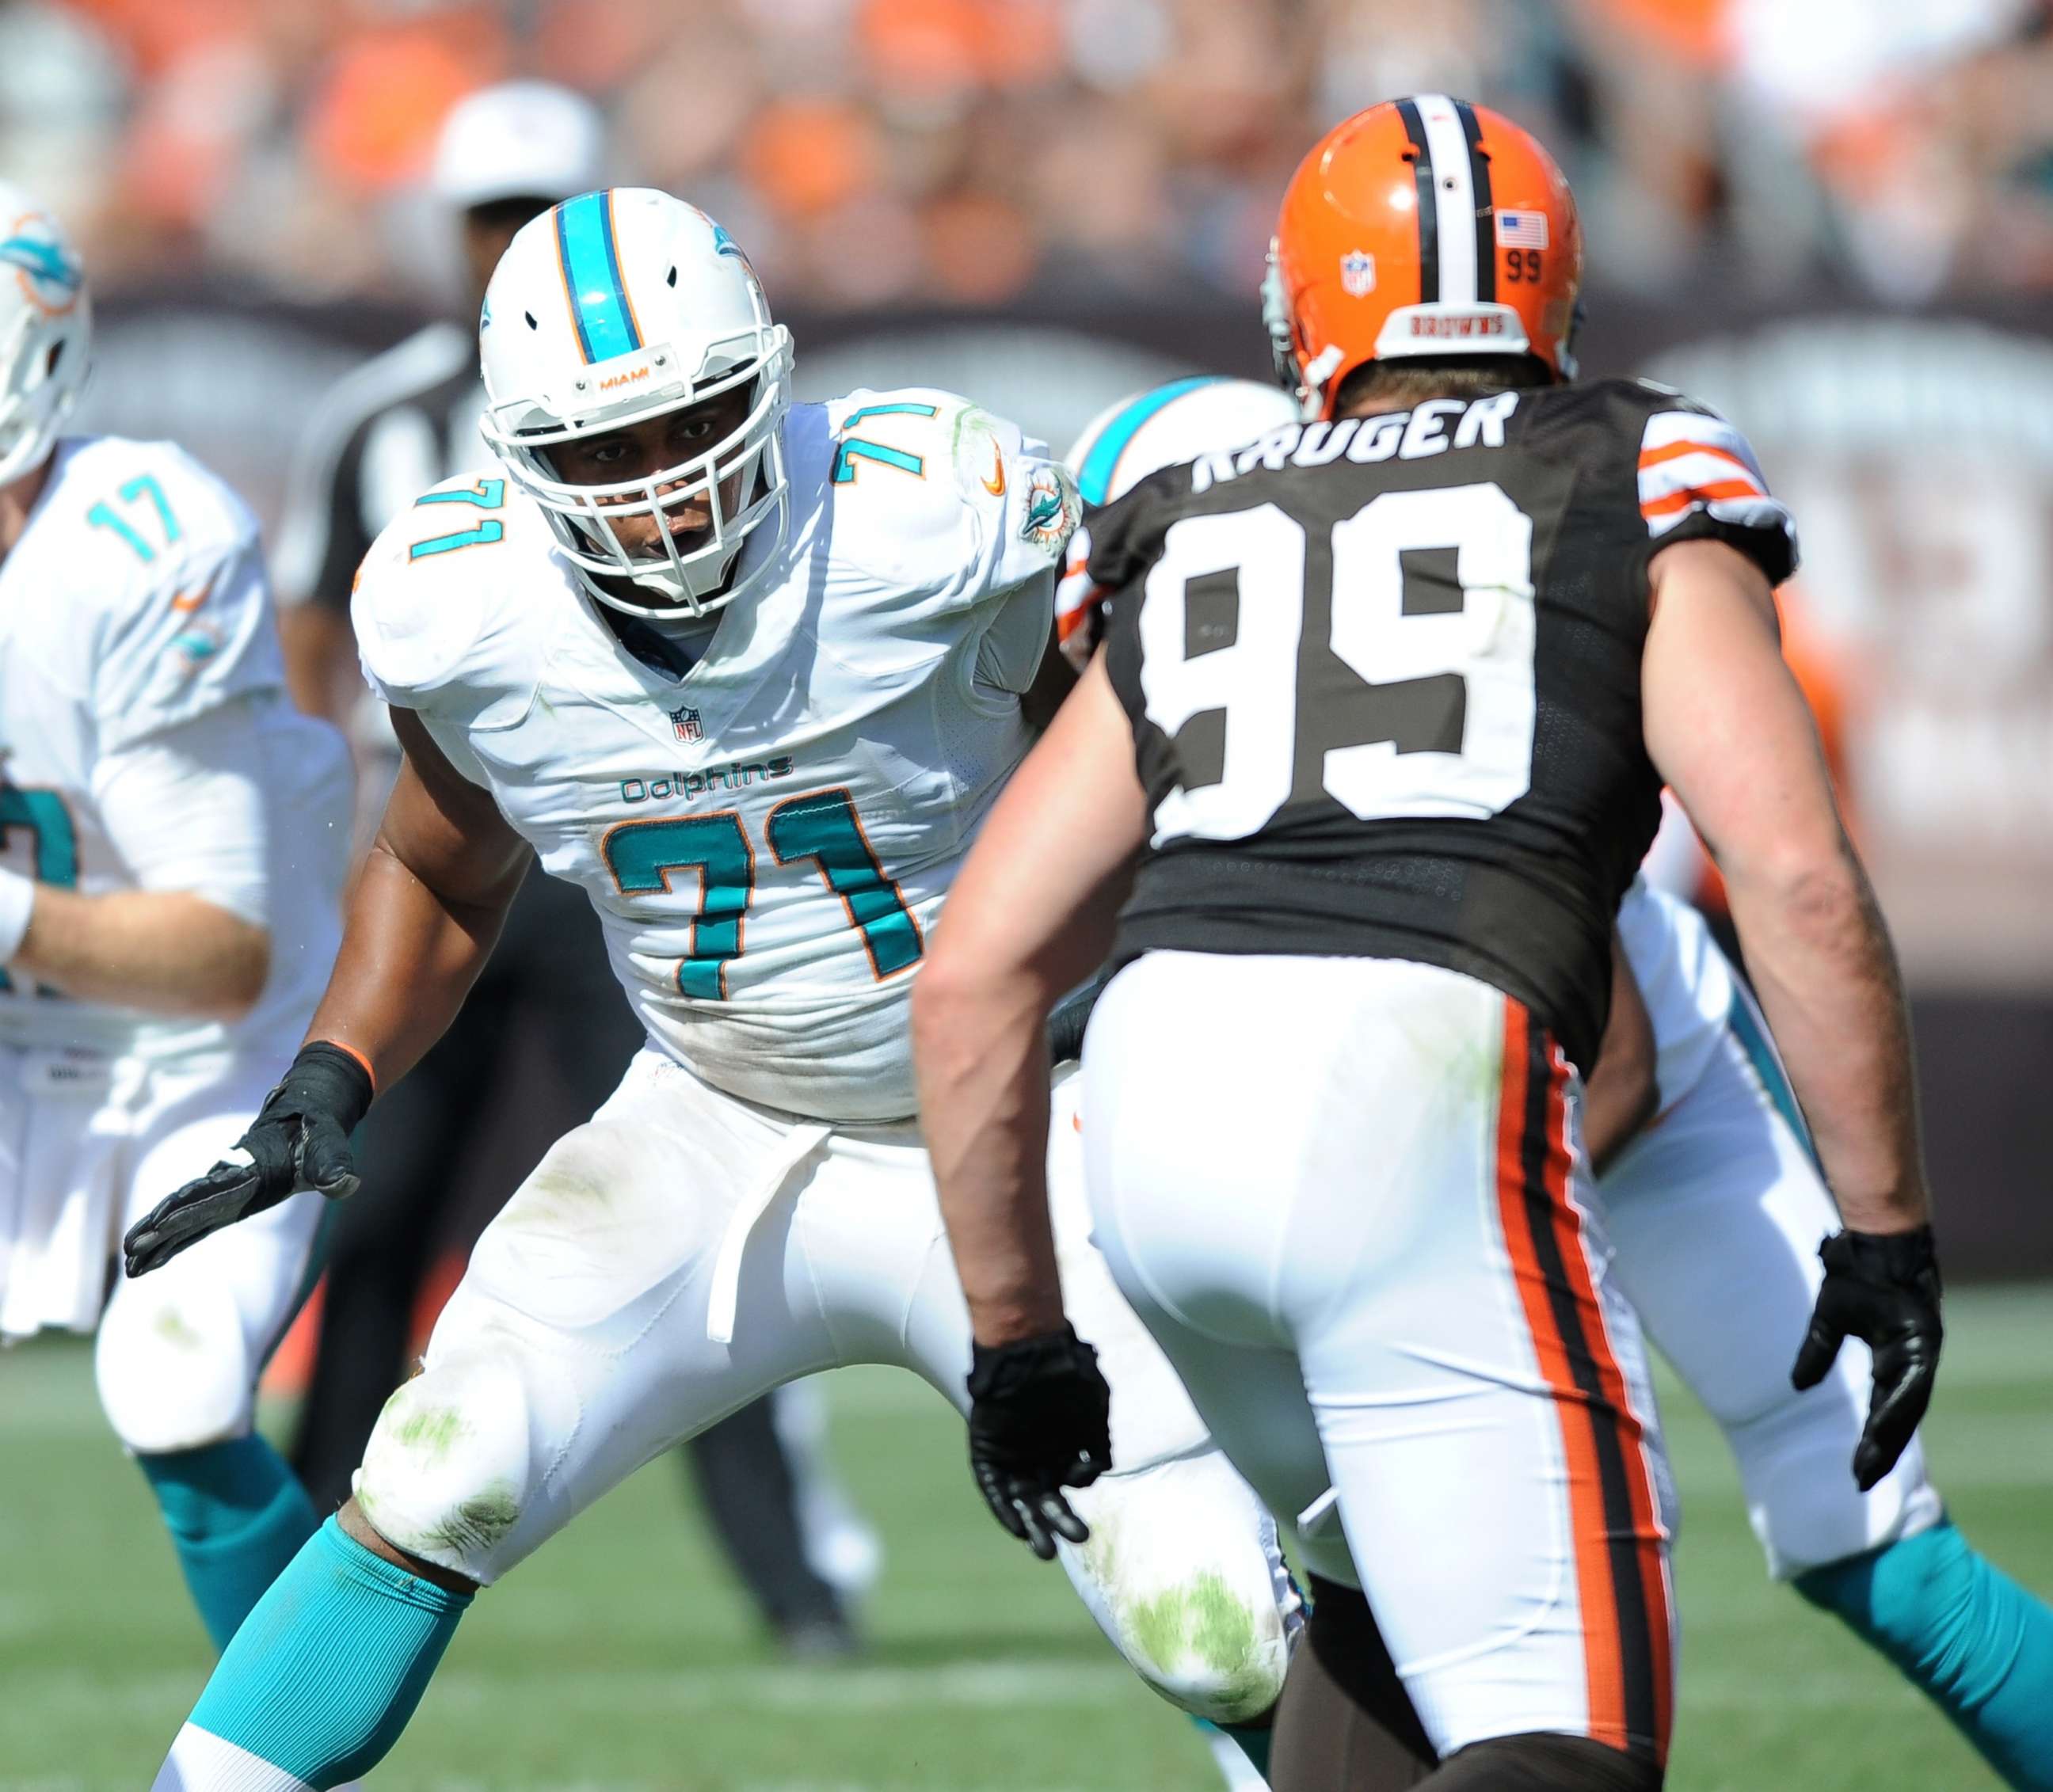 PHOTO: Offensive linemen Jonathan Martin #71 of the Miami Dolphins prepares to block linebacker Paul Kruger #99 of the Cleveland Browns.